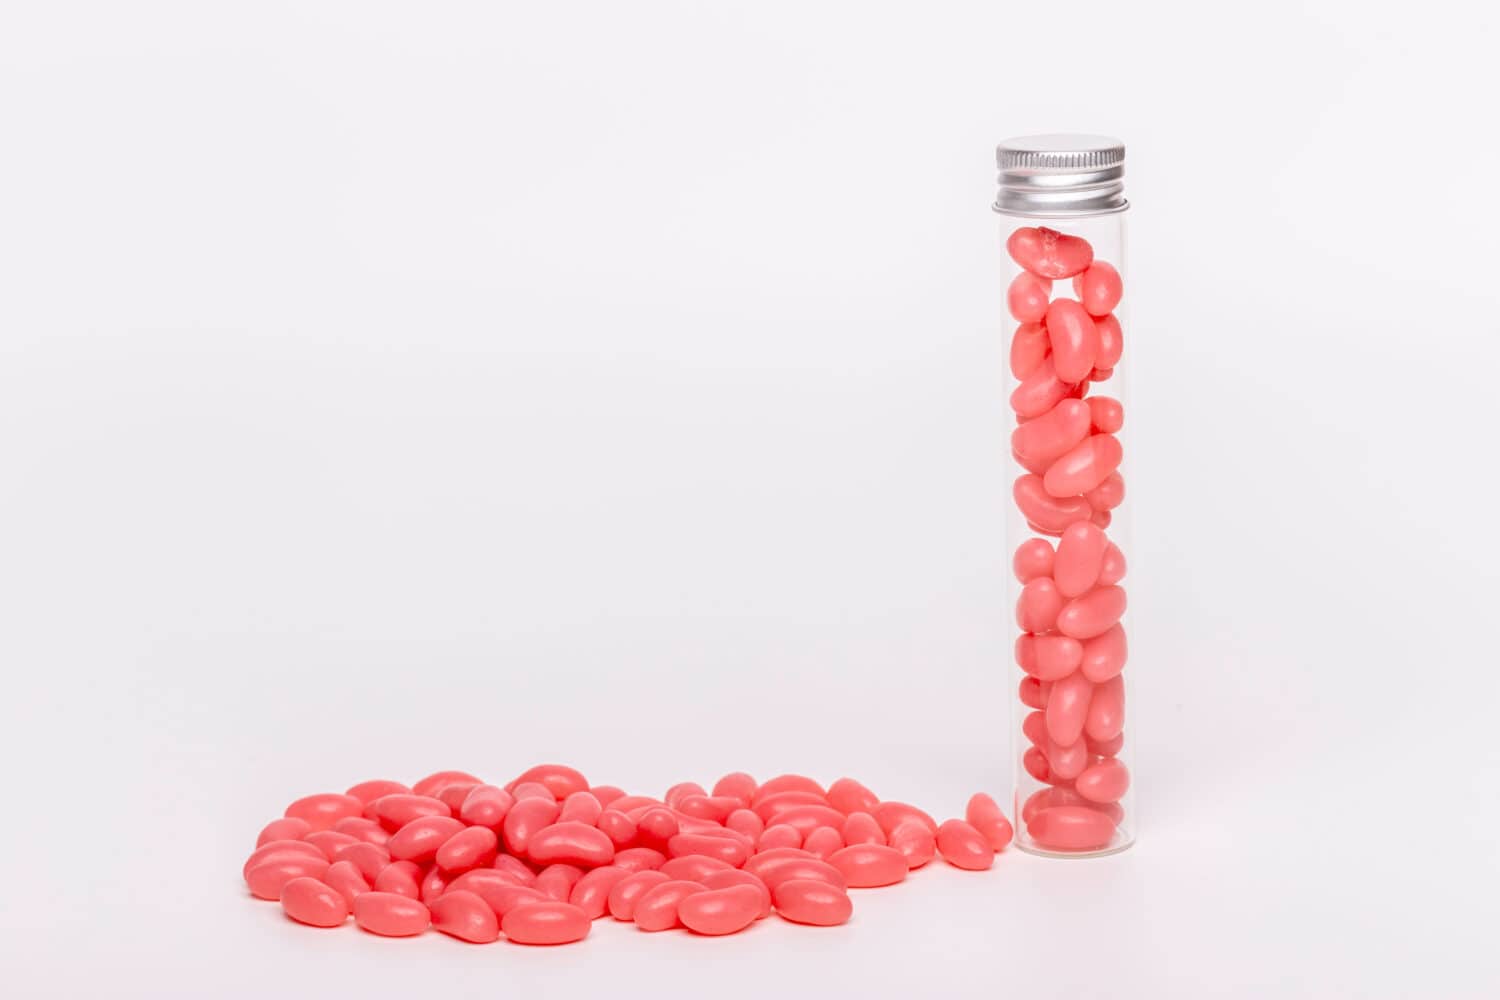 Pink jelly beans in a test tube jar with loose beans on a white background